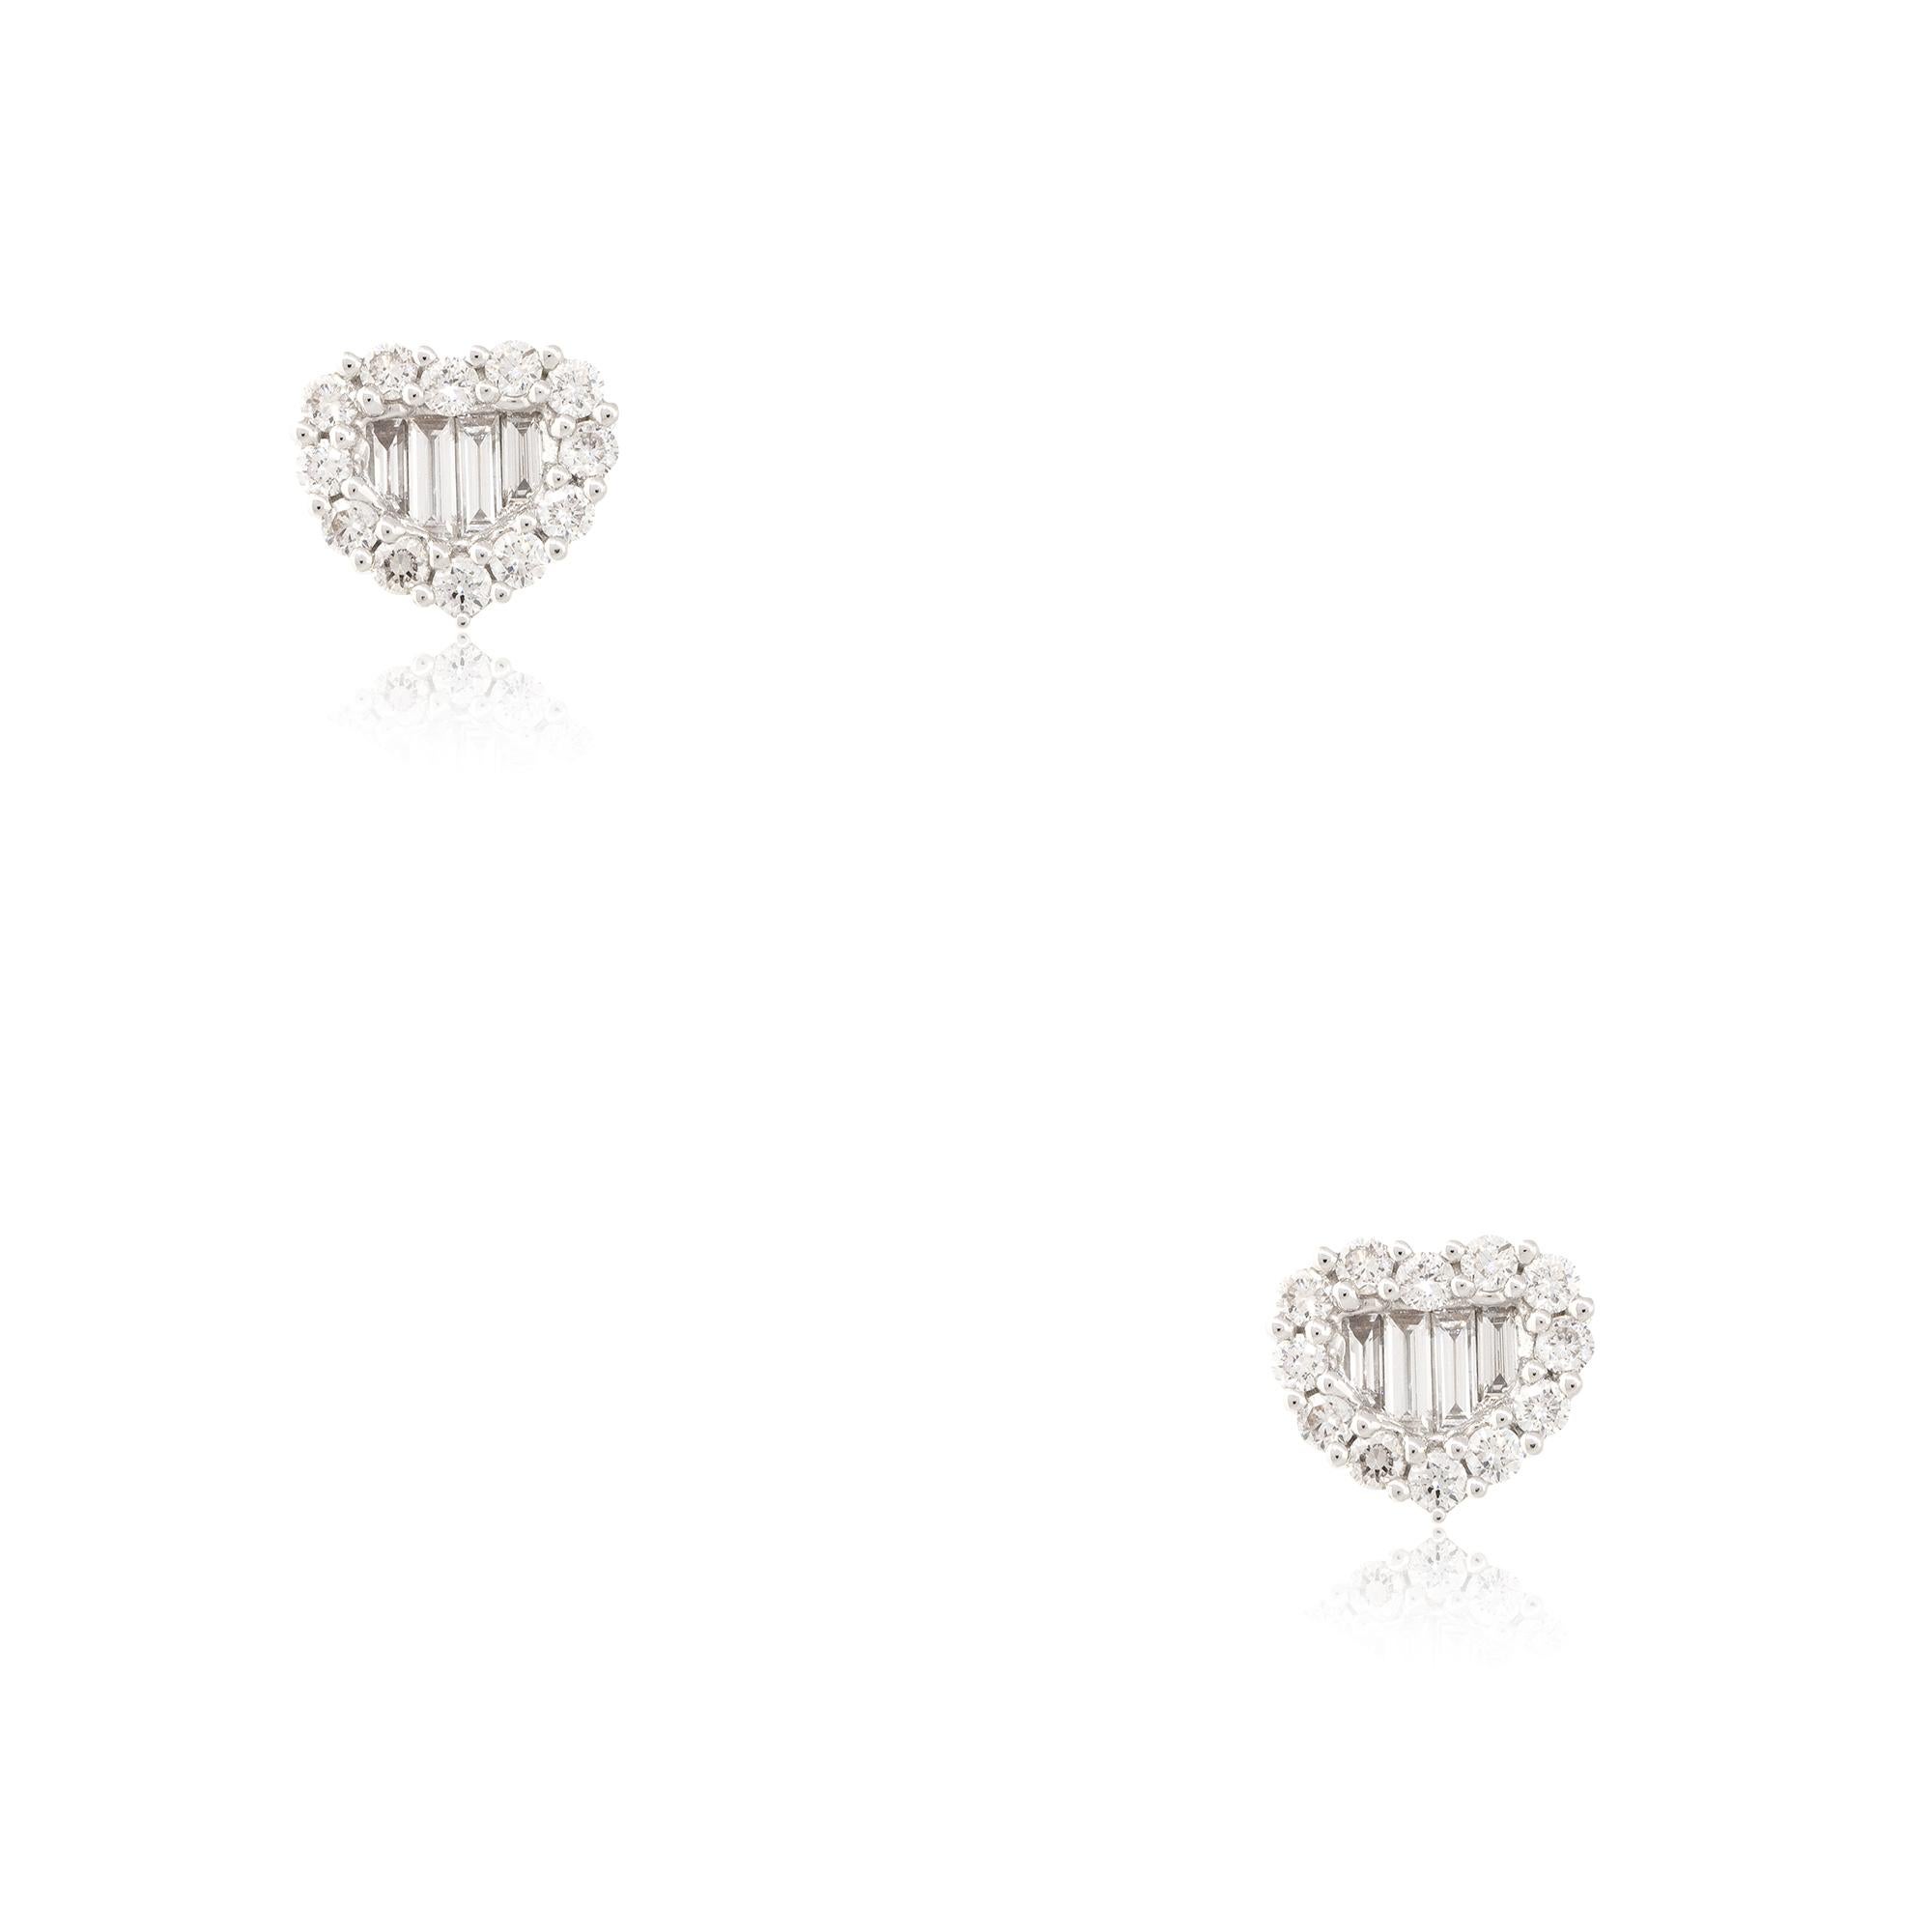 18k White Gold 1.0ctw Round Brilliant and Baguette Diamond Heart Stud Earrings
Material: 18k White Gold
Diamond Details: Approximately 1.0w of Round Brilliant and Baguette Cut Diamonds
Item Dimensions: 10.5mm x 3.3mm x 9.13mm 
Earring Backs: